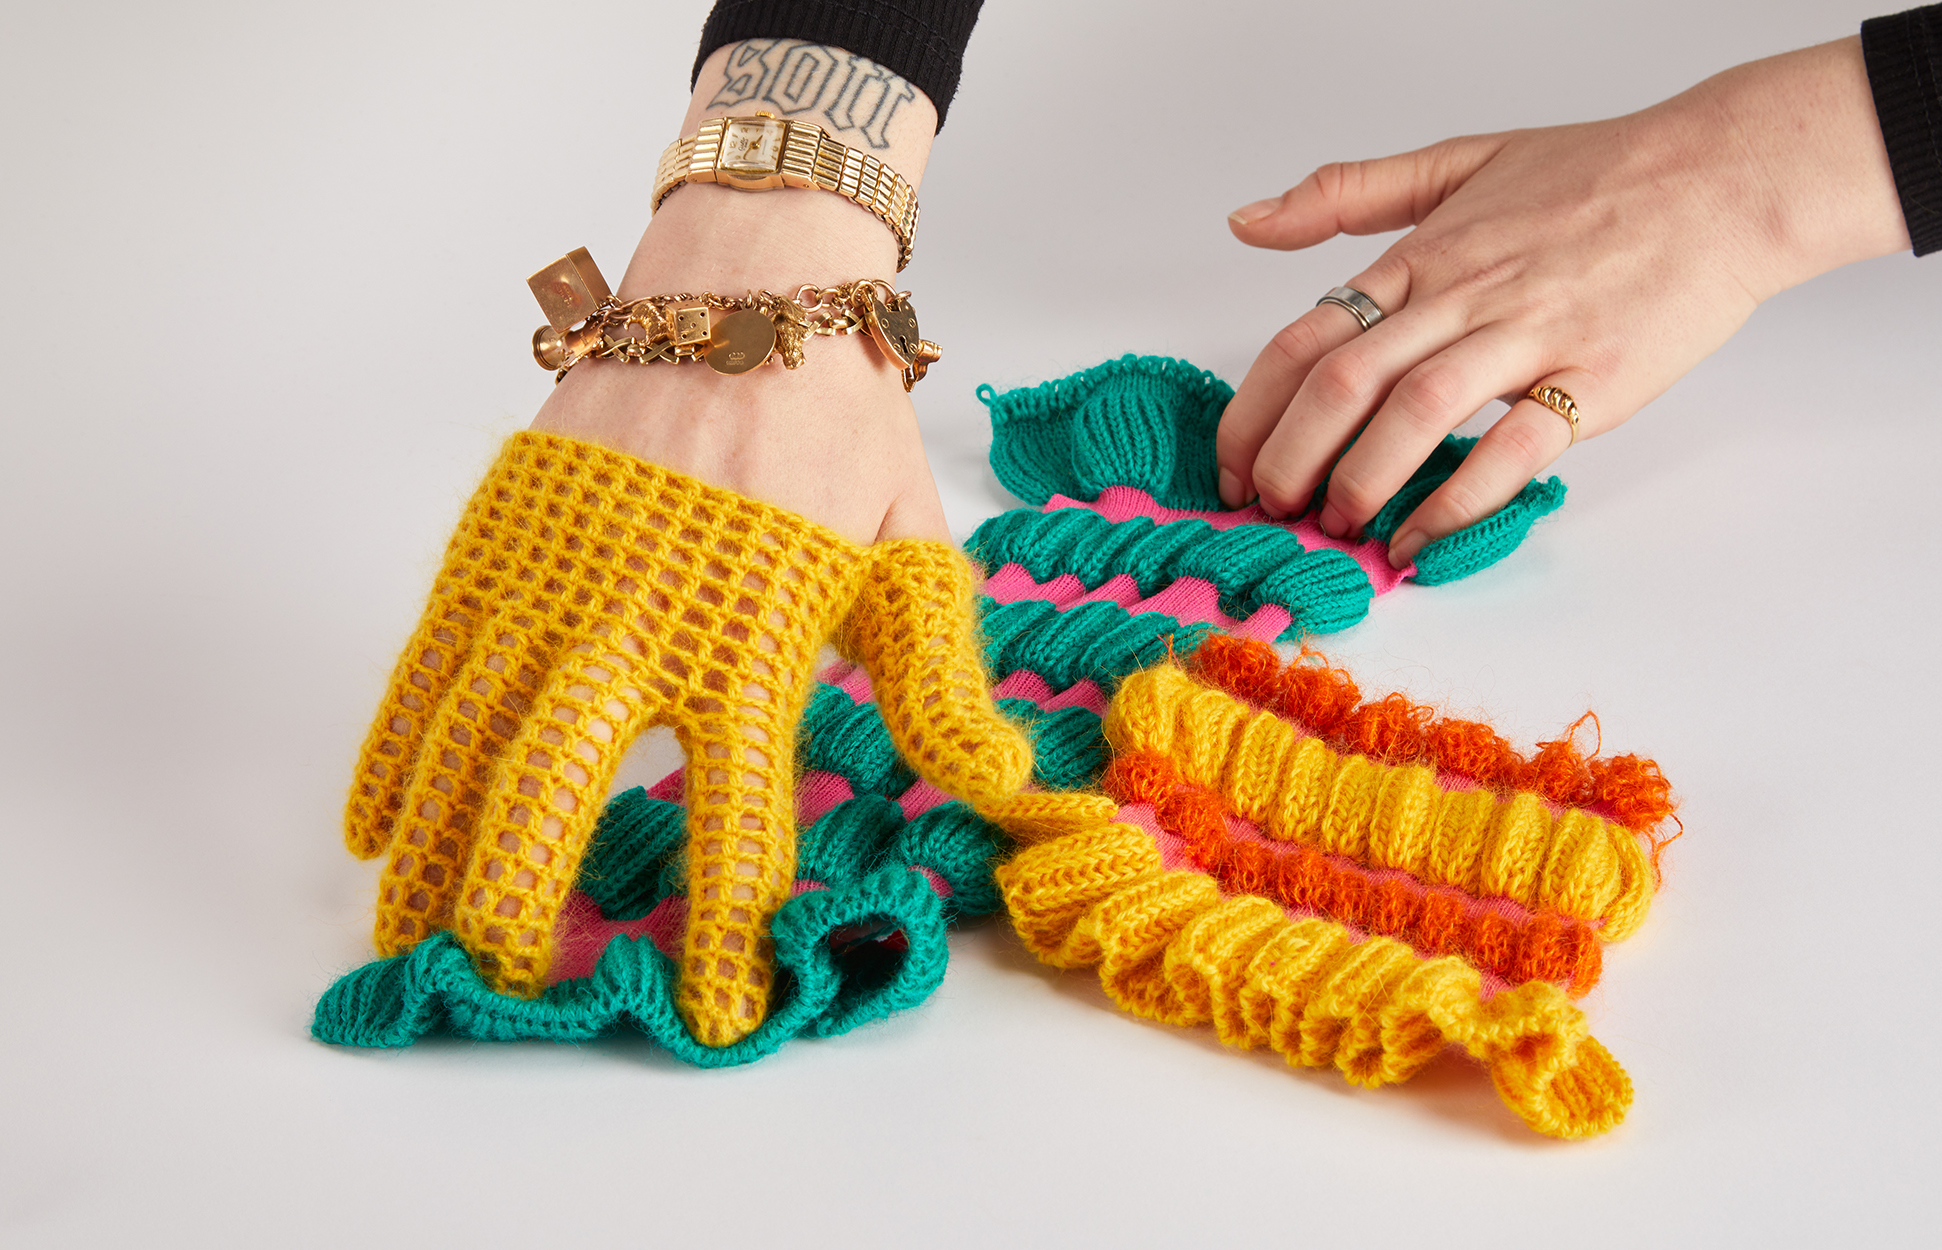 Delicate filet crochet glove interacts with the structural bizzarities of tactile, stretchable knit samples.